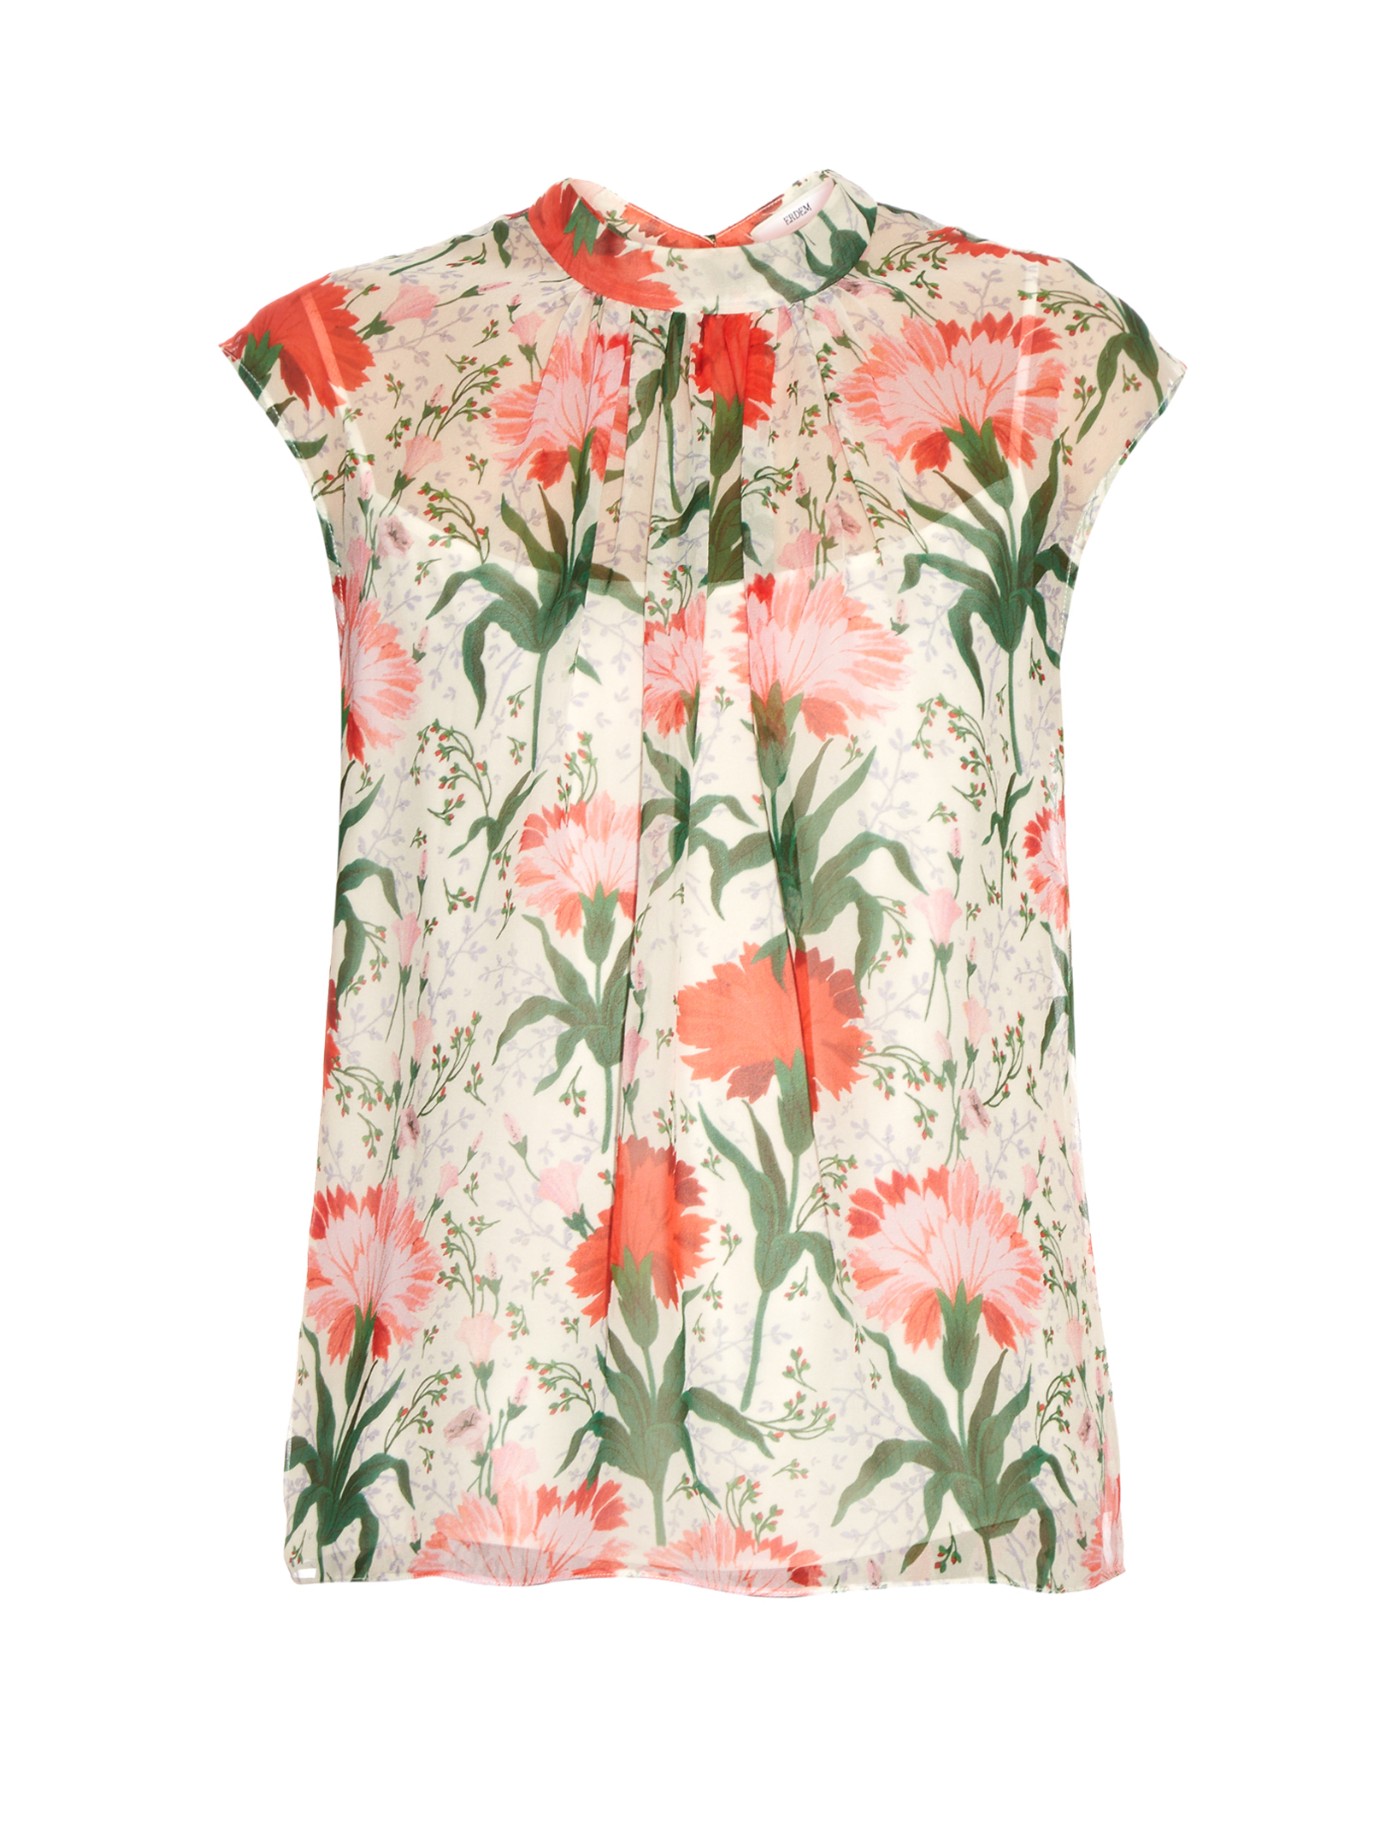 CASUAL CHIC: ERDEM Iona Carnation-print silk-voile top